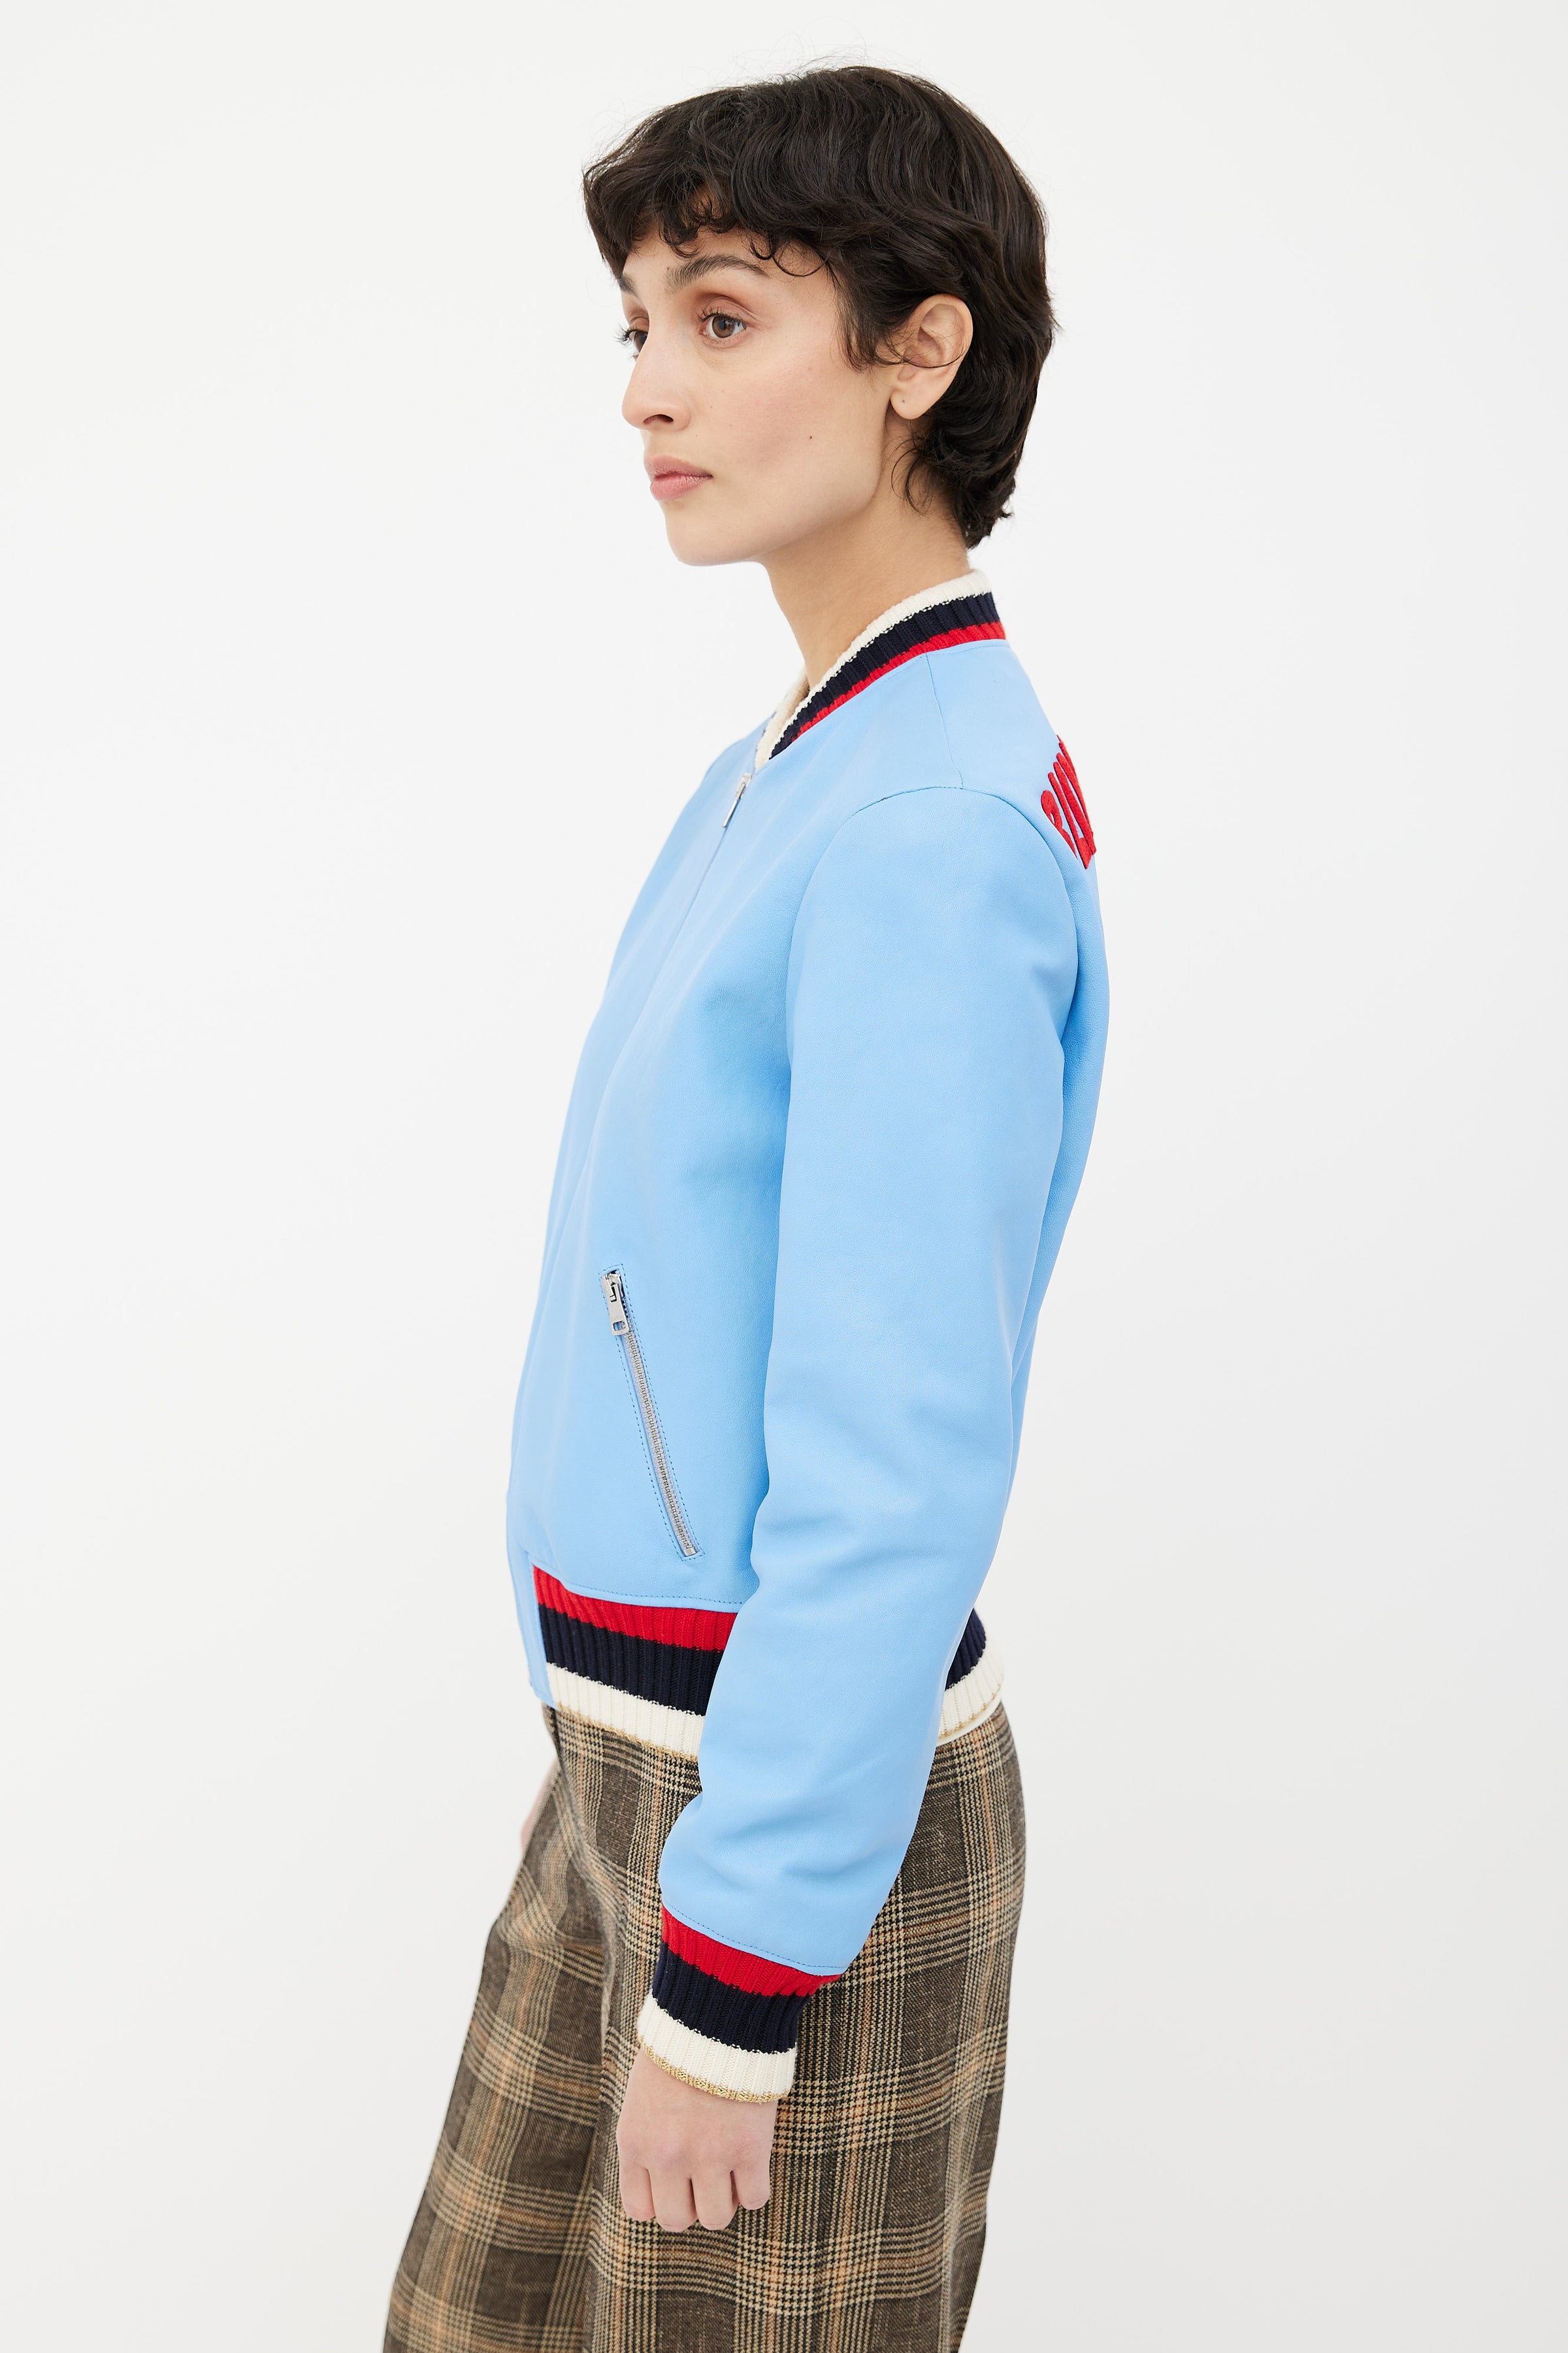 Logo Bomber Jacket in Blue - Gucci